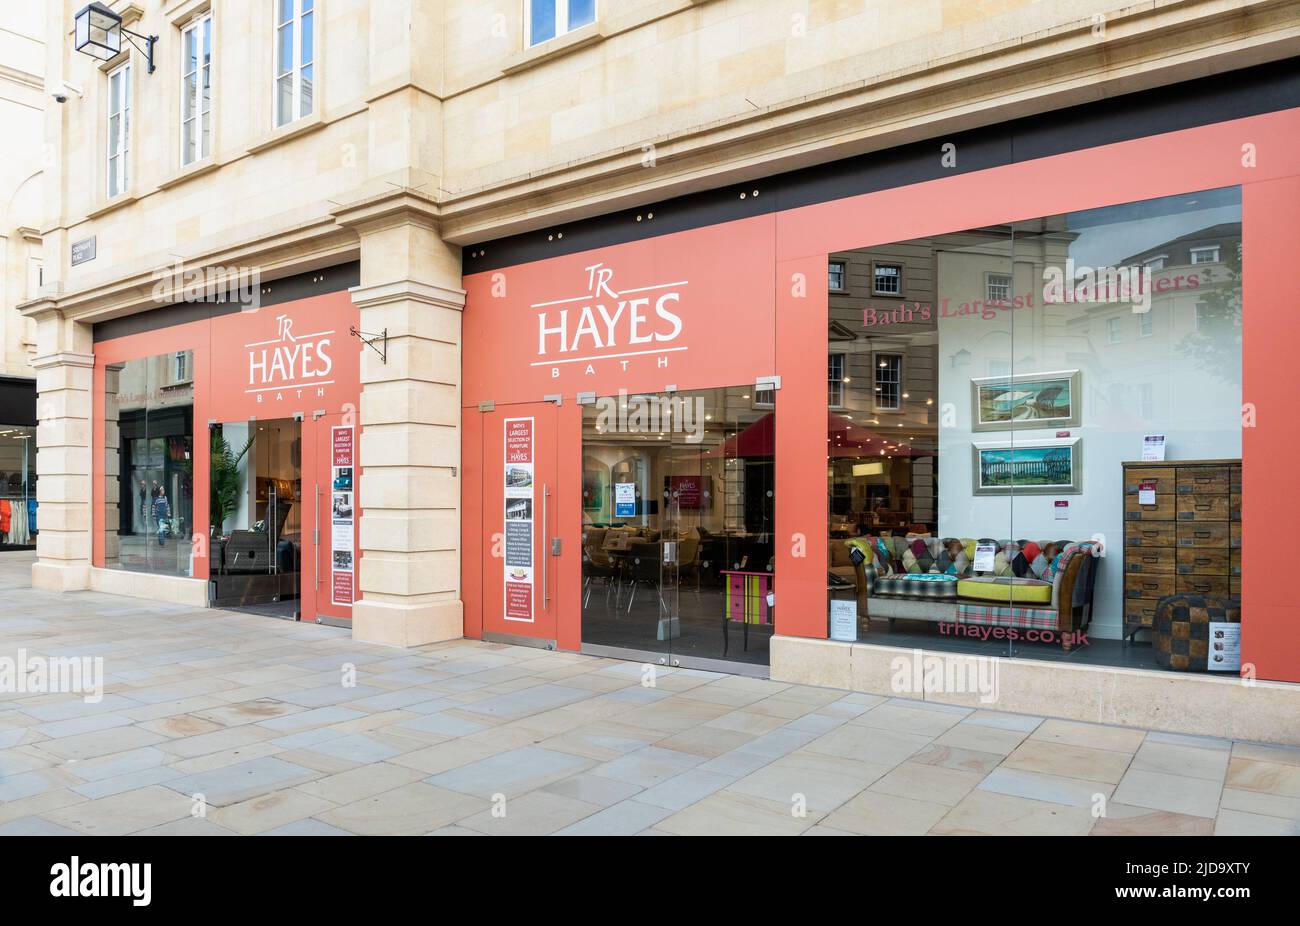 TR Hayes - Bath's Largest Furniture store a temporary pop-up shop in Southgate Shopping Centre, City of Bath. Somerset, England, UK Stock Photo